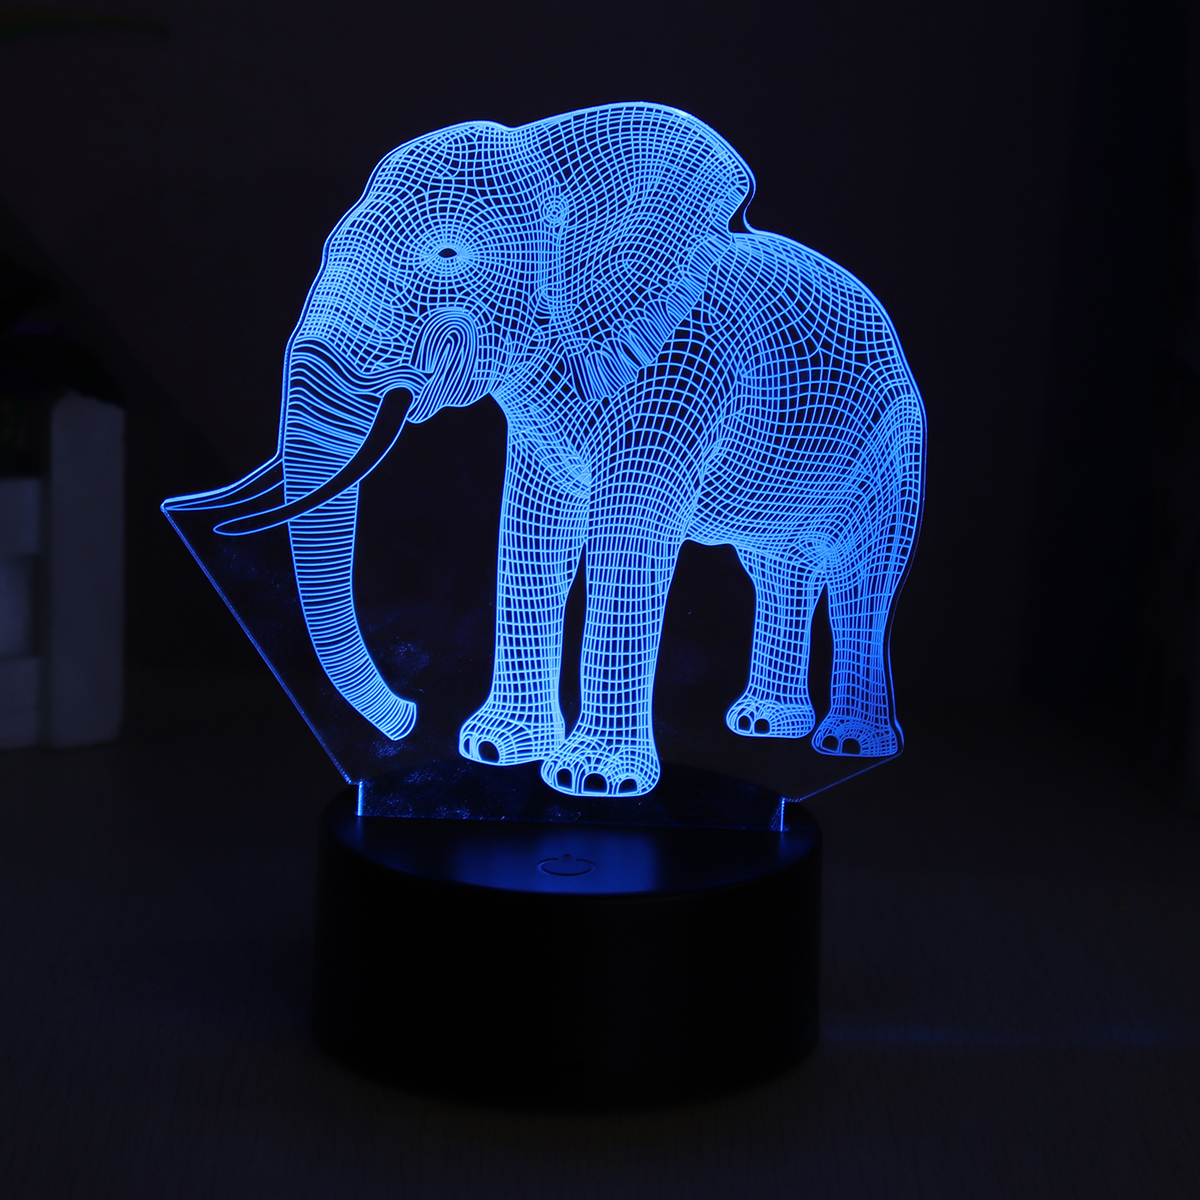 3D-Acrylic-LED-716-Colors-Colorful-Night-Lights-Elephant-Model-Remote-Control-Touch-Switch-Night-Lig-1370467-12